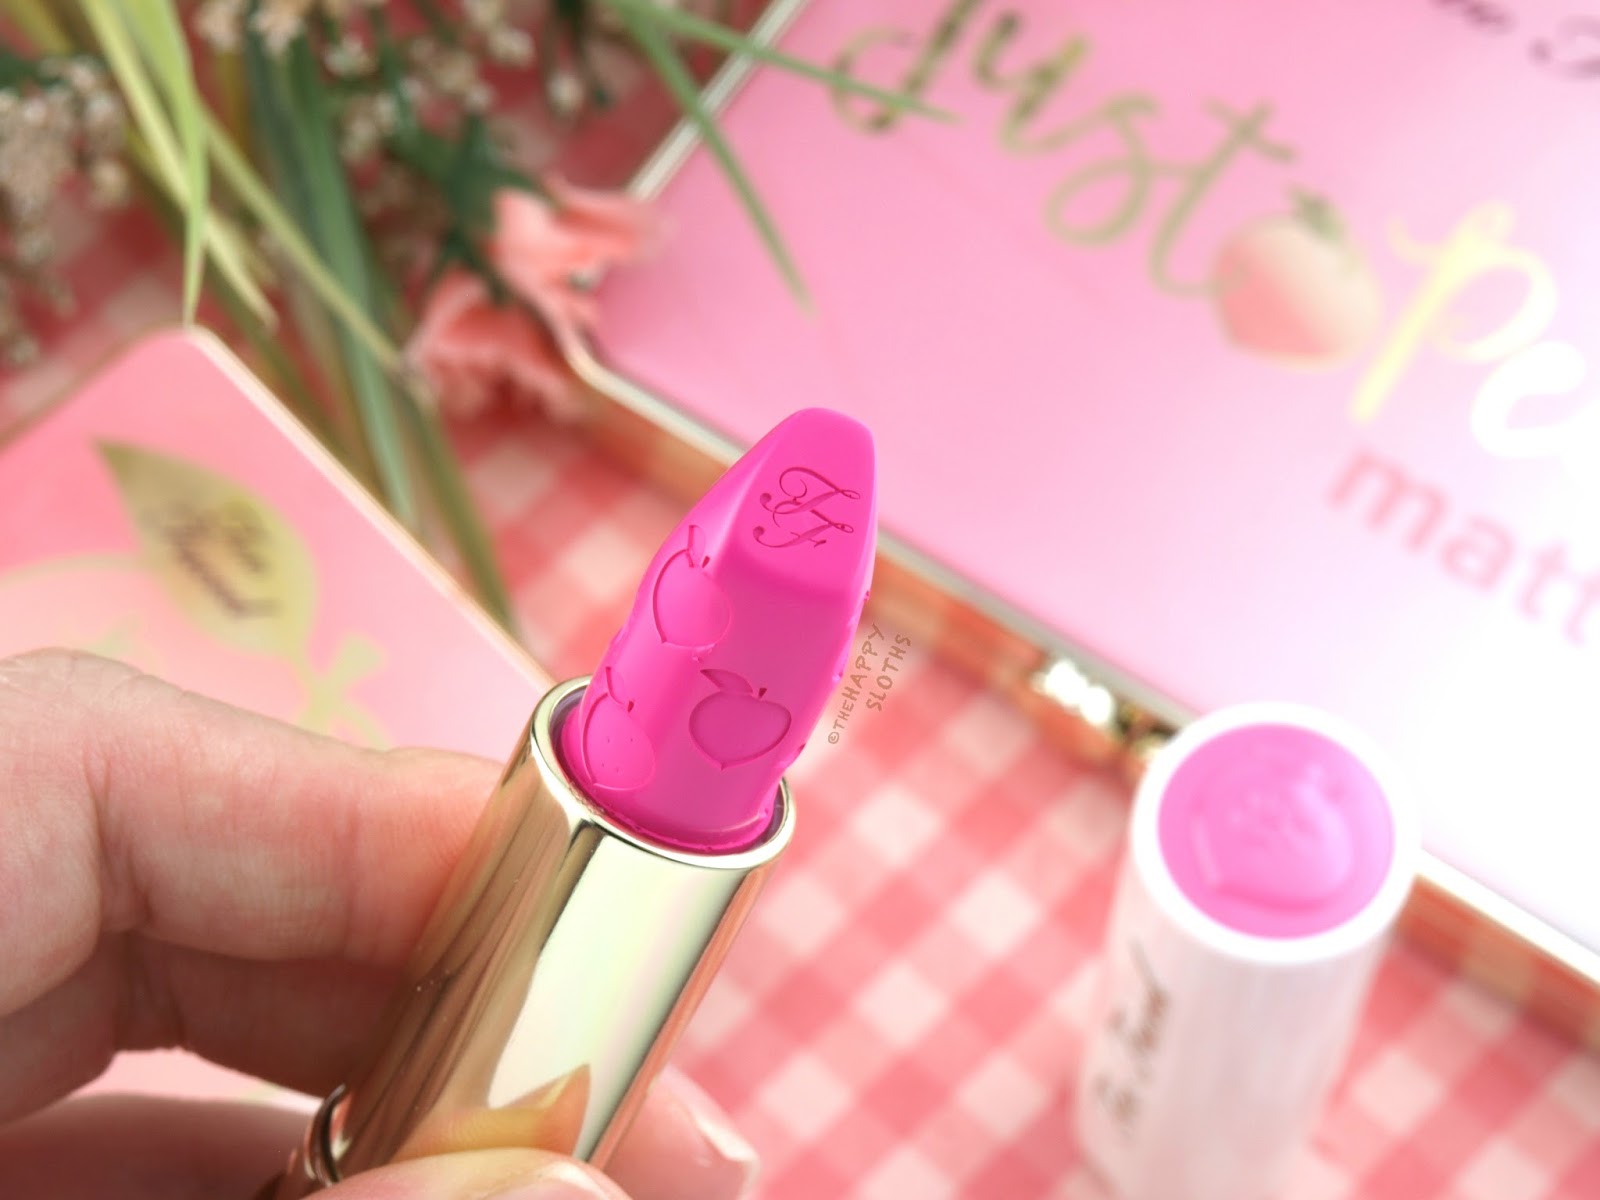 Too Faced Peaches & Cream Collection | Peach Kiss Moisture Matte Long Wear Lipstick: Review and Swatches